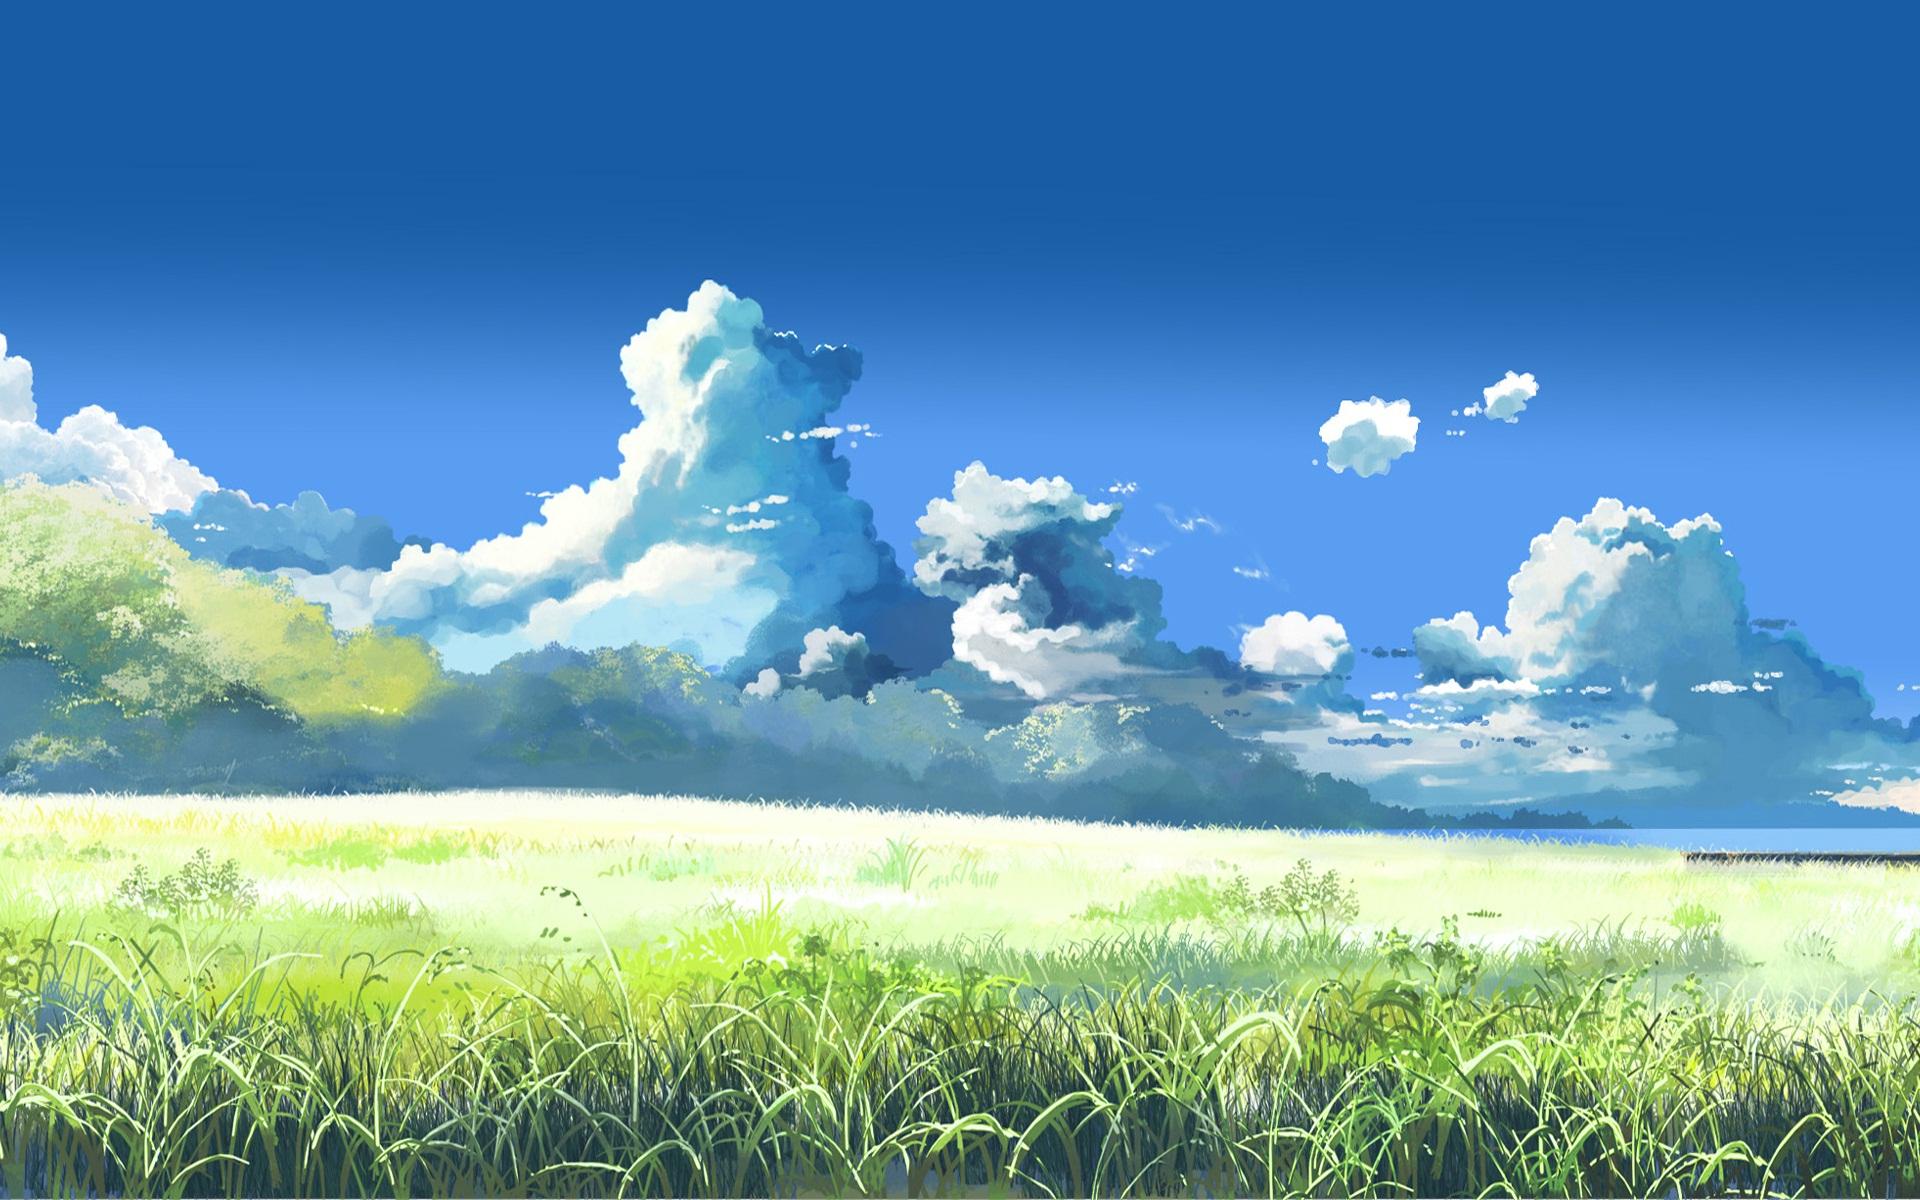 Beautiful anime landscape with sky and clouds, Anime landscape, anime  countryside landscape, anime landscape wallpapers, anime beautiful peace  scene - SeaArt AI